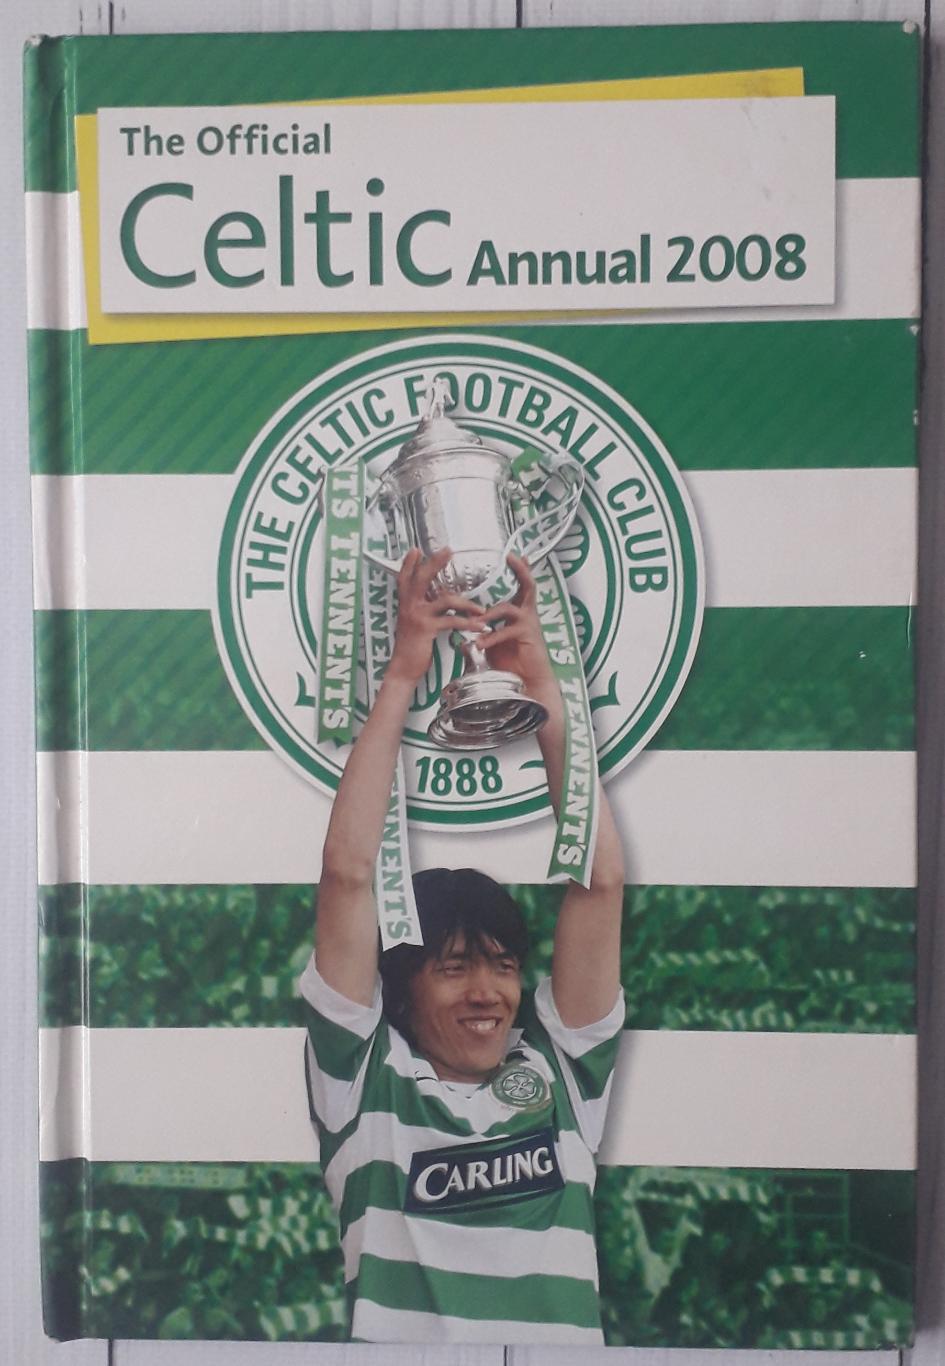 The Official Celtic Annual 2008